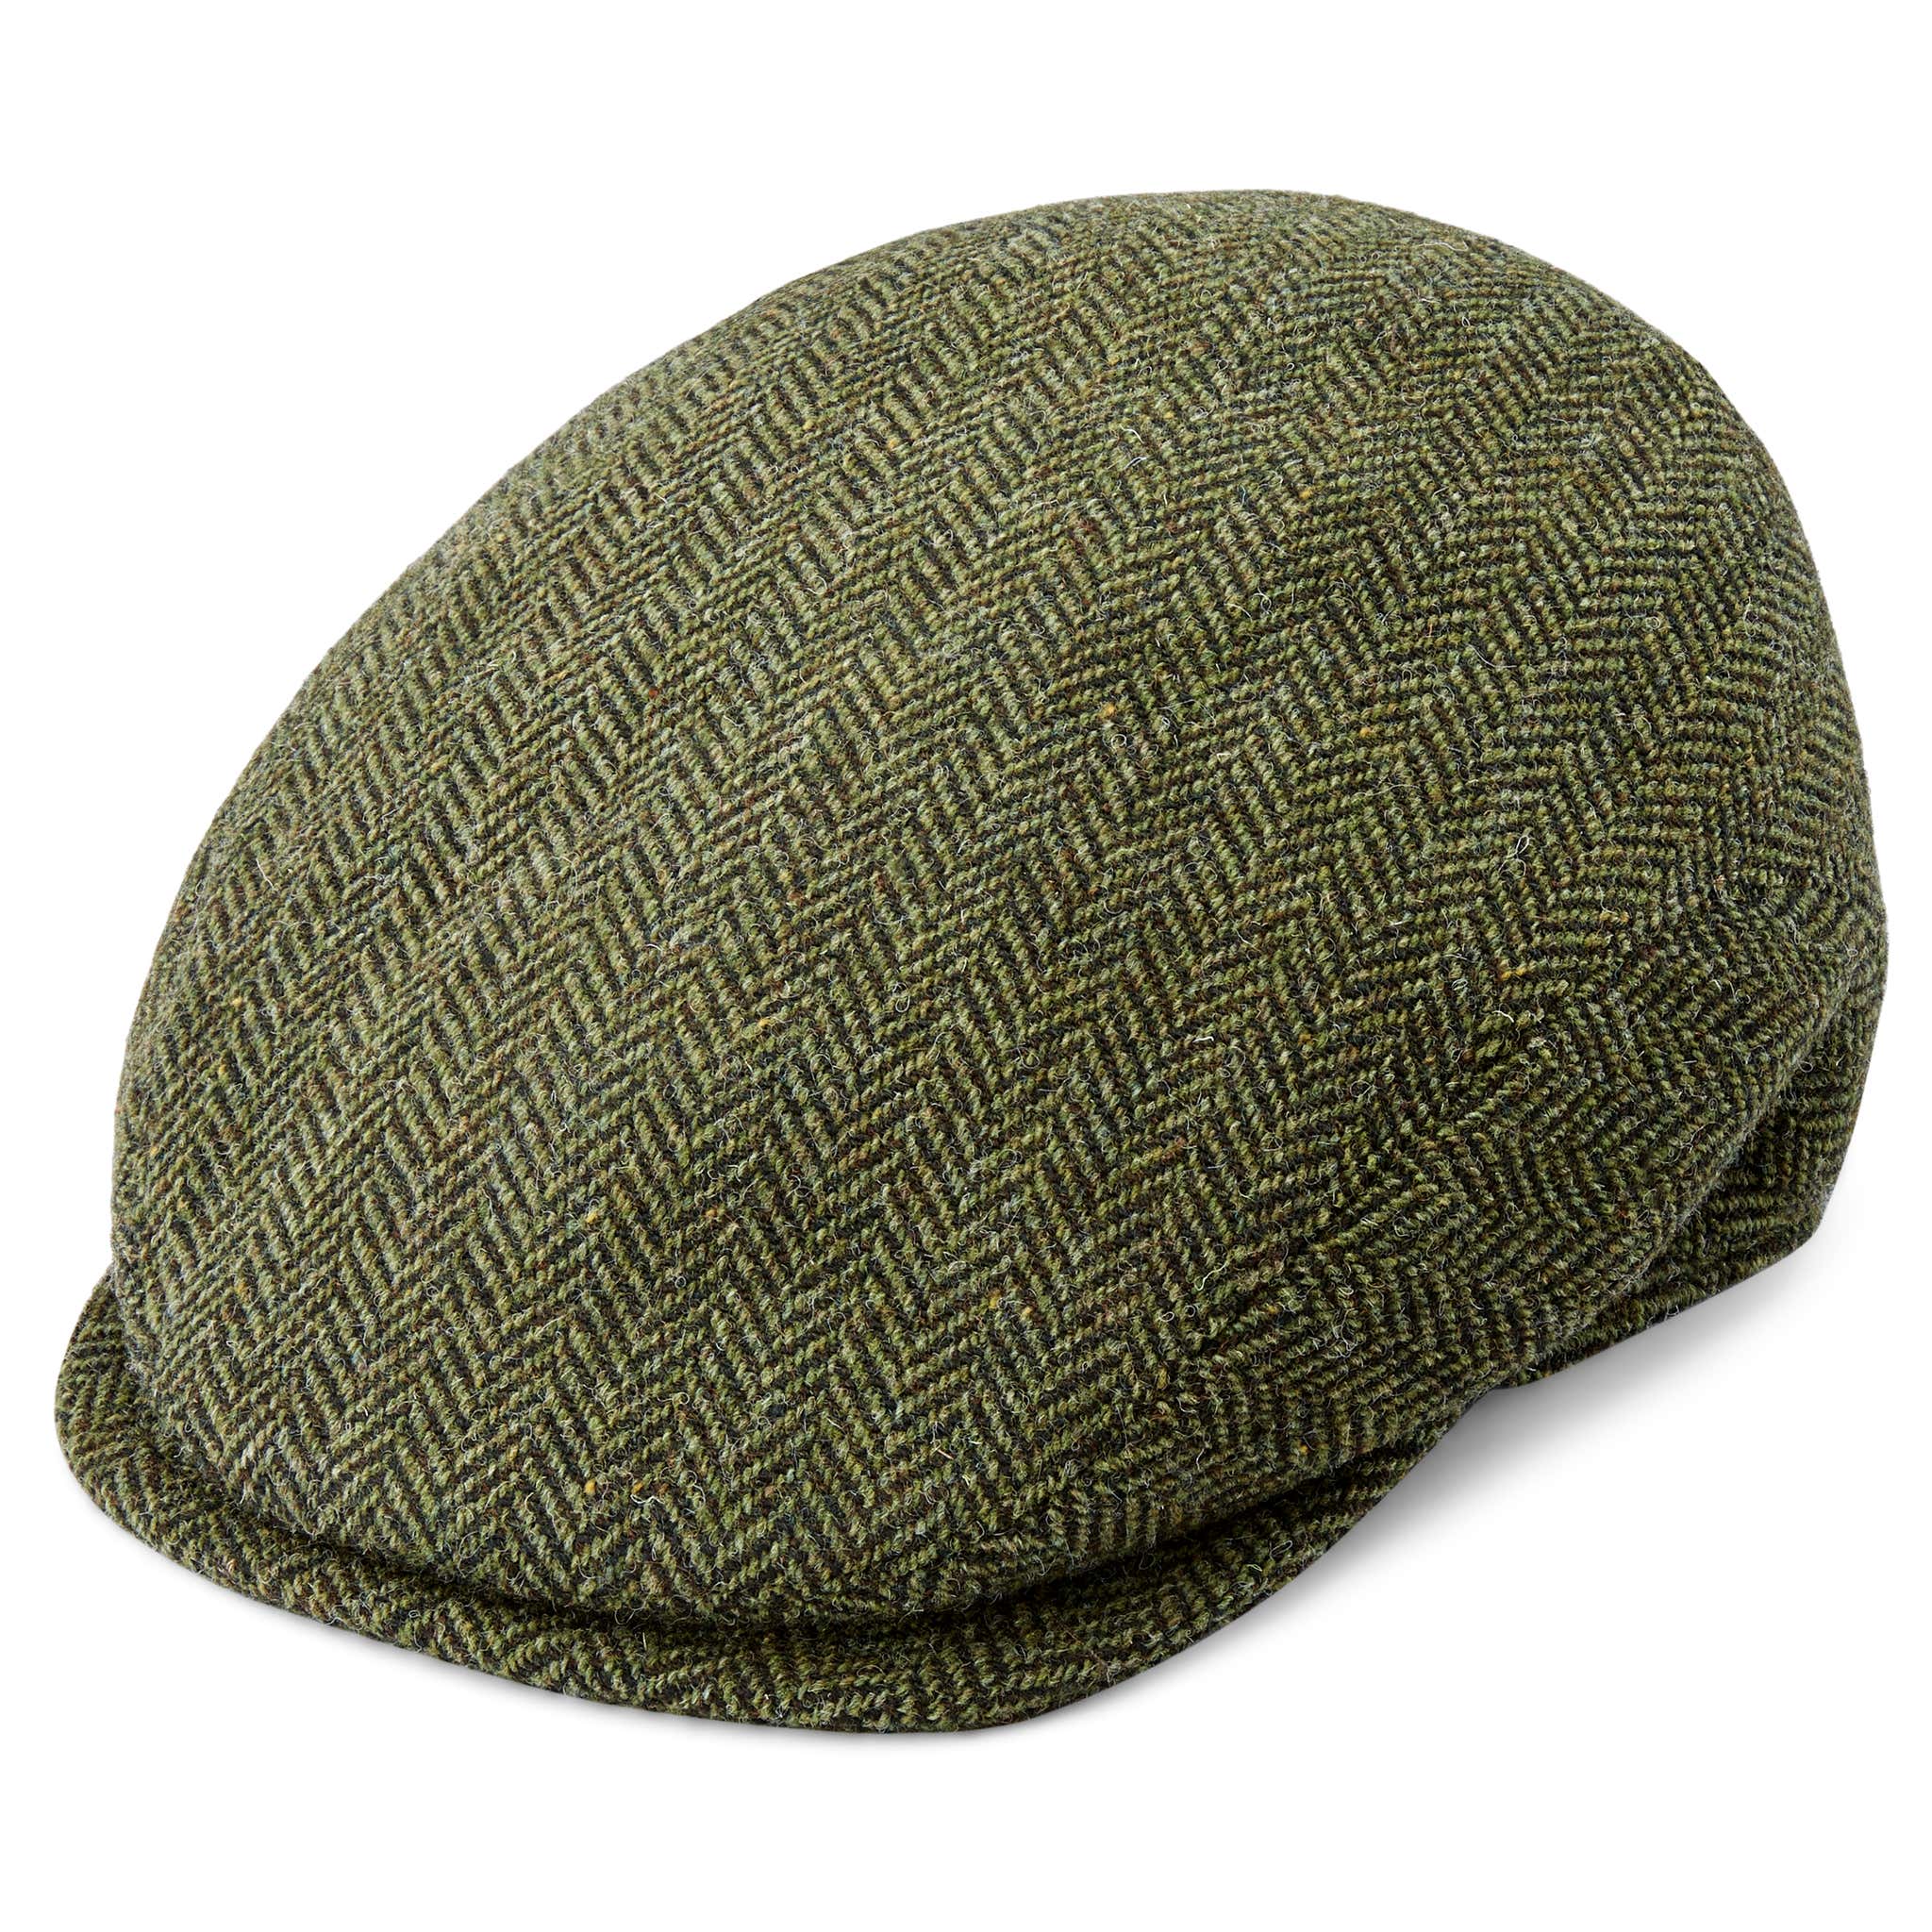 How to Wear A Flat Cap Without Looking Flat